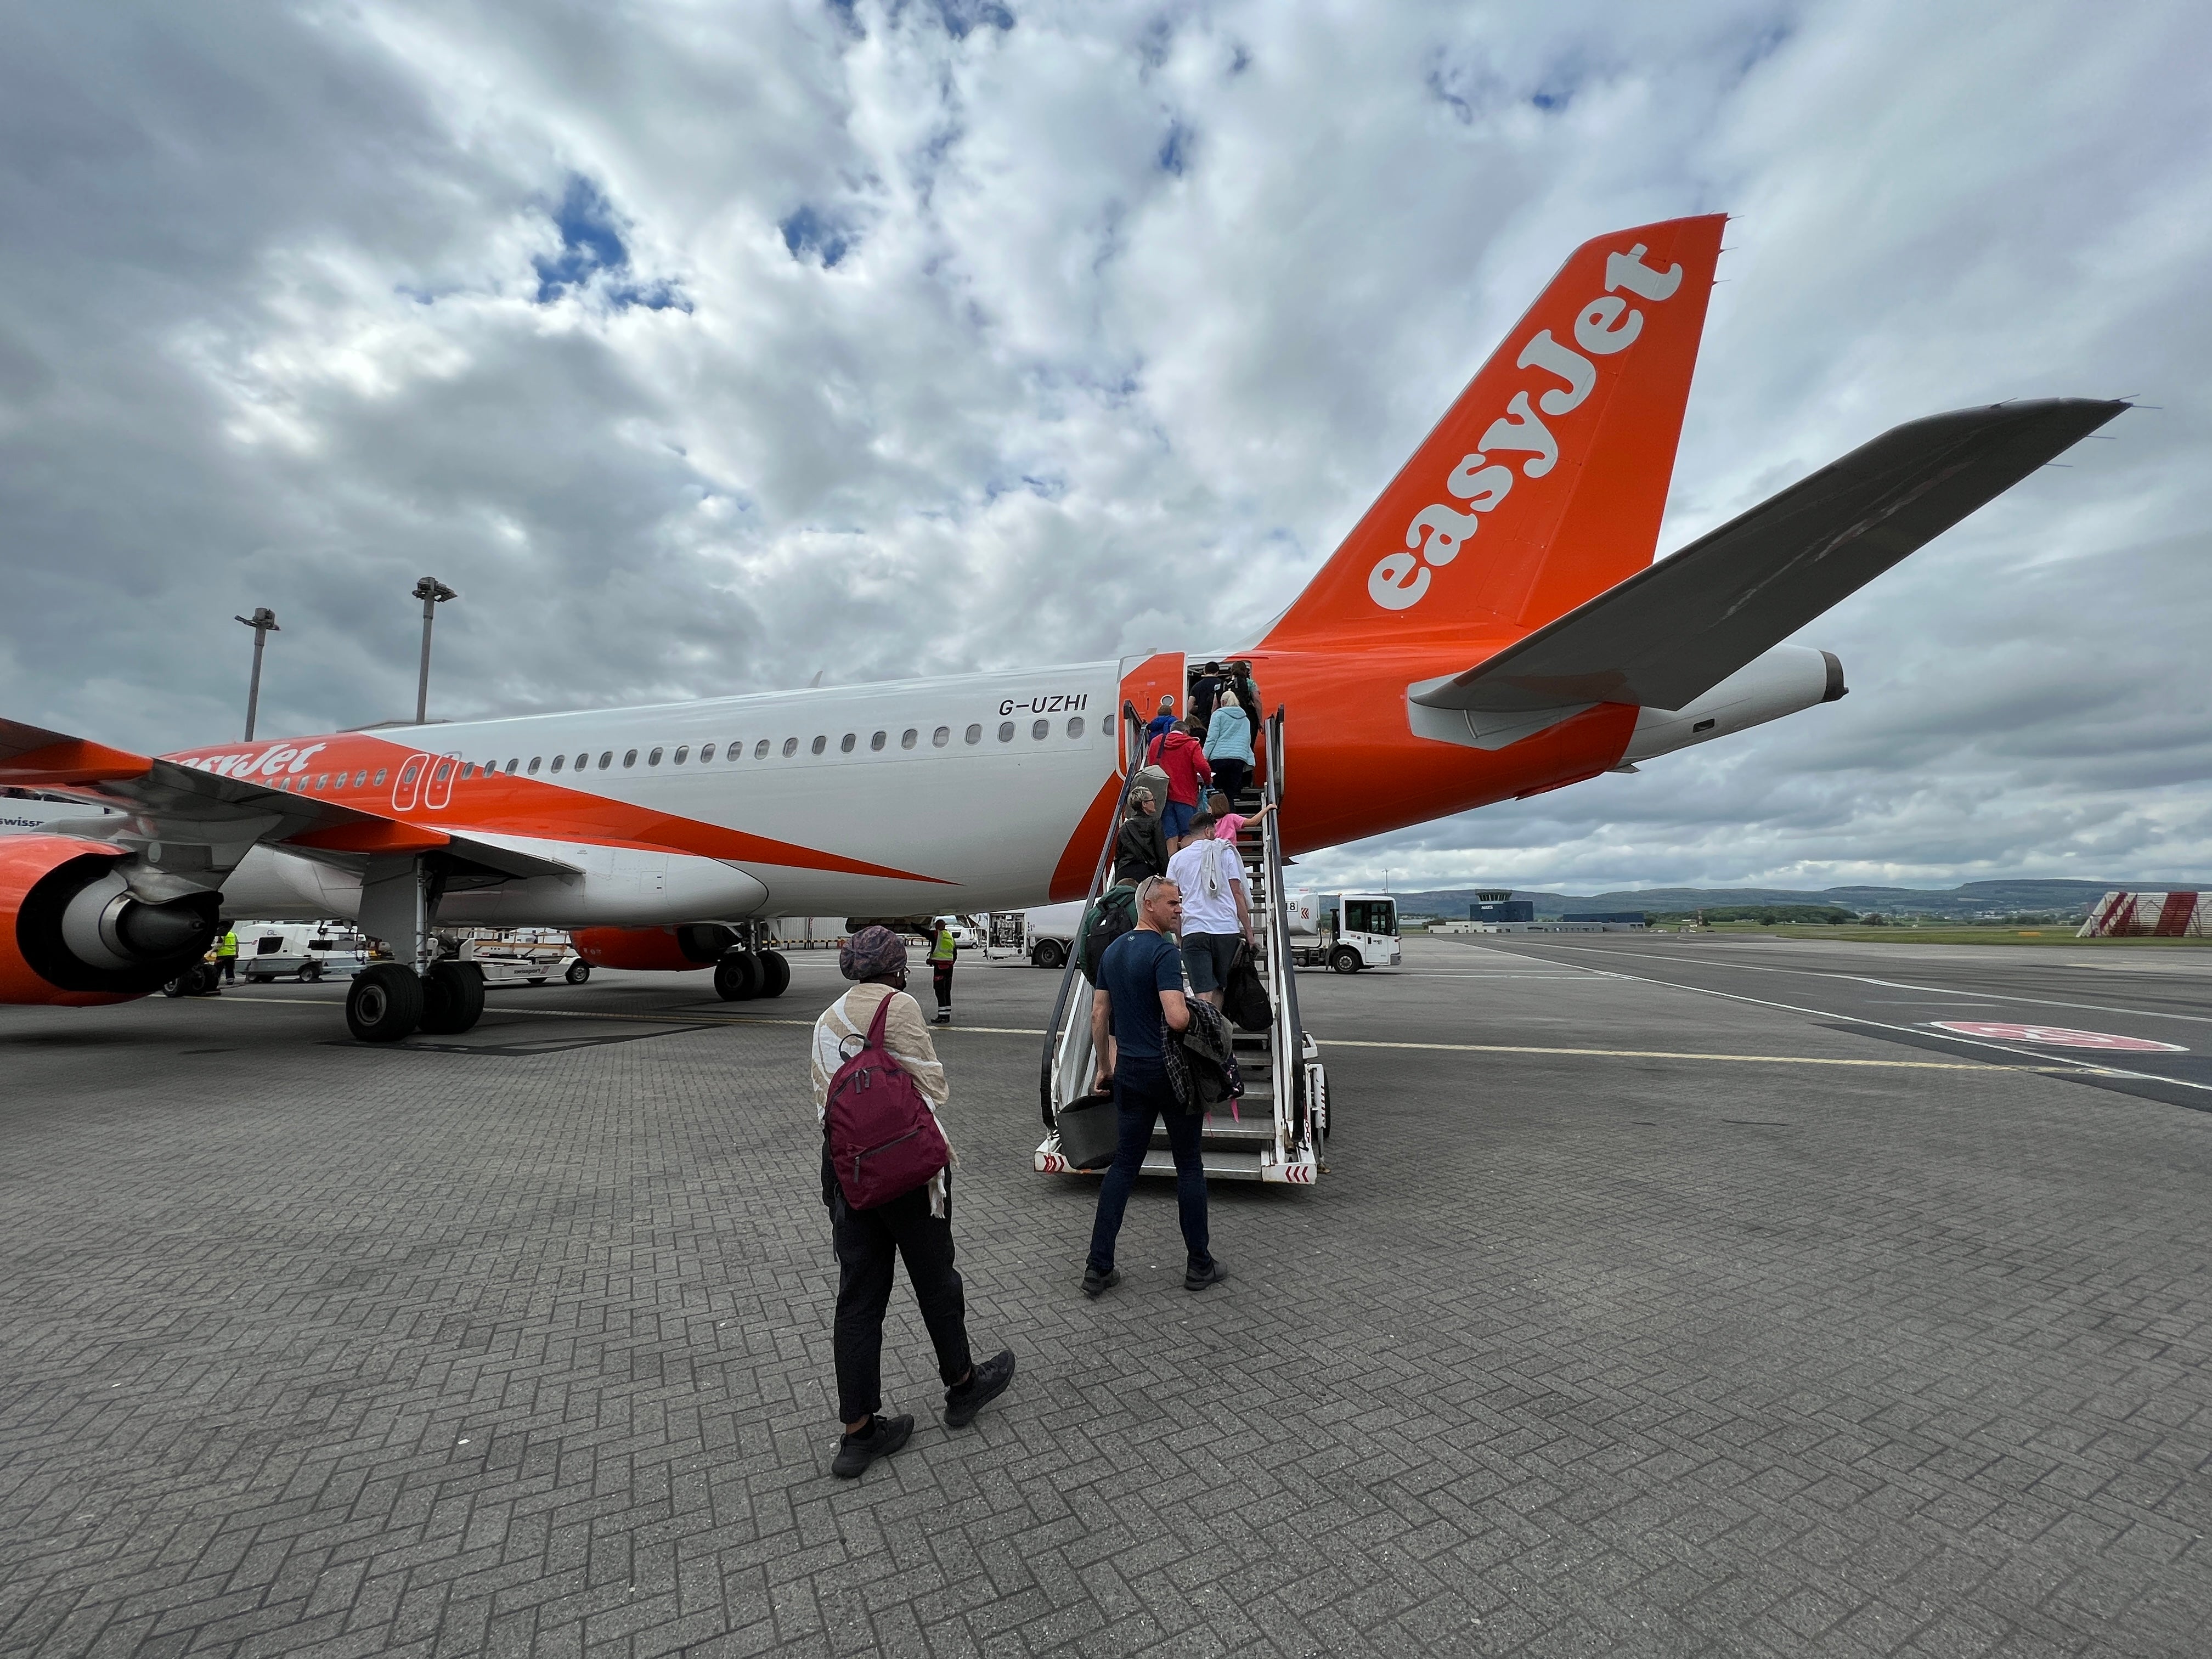 Going places? The mildly delayed easyJet plane from Glasgow to Stansted